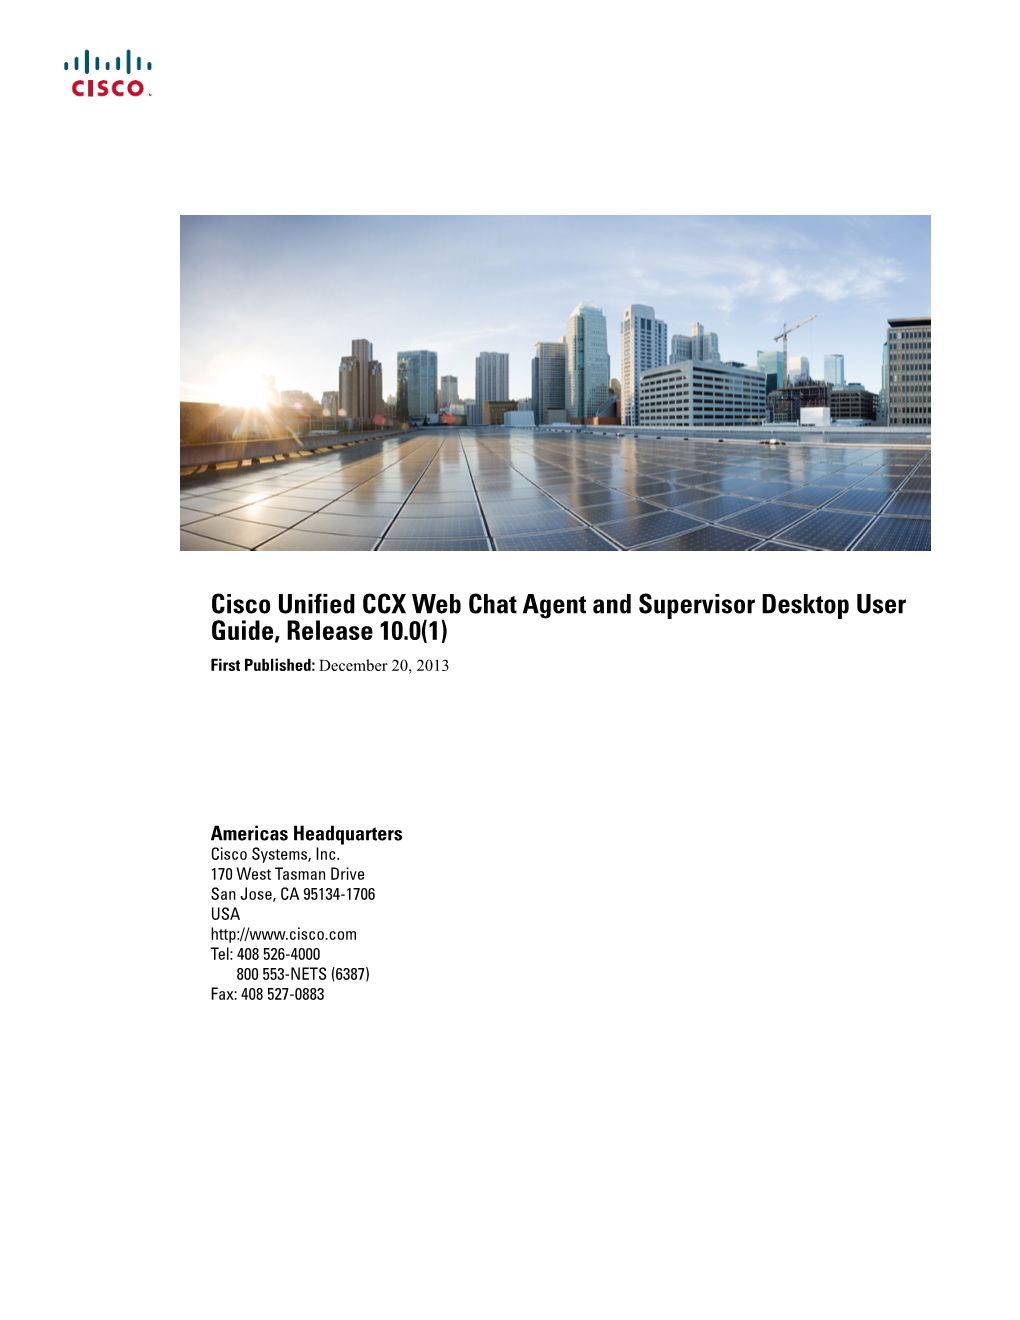 Cisco Unified CCX Web Chat Agent and Supervisor Desktop User Guide, Release 10.0(1) First Published: December 20, 2013